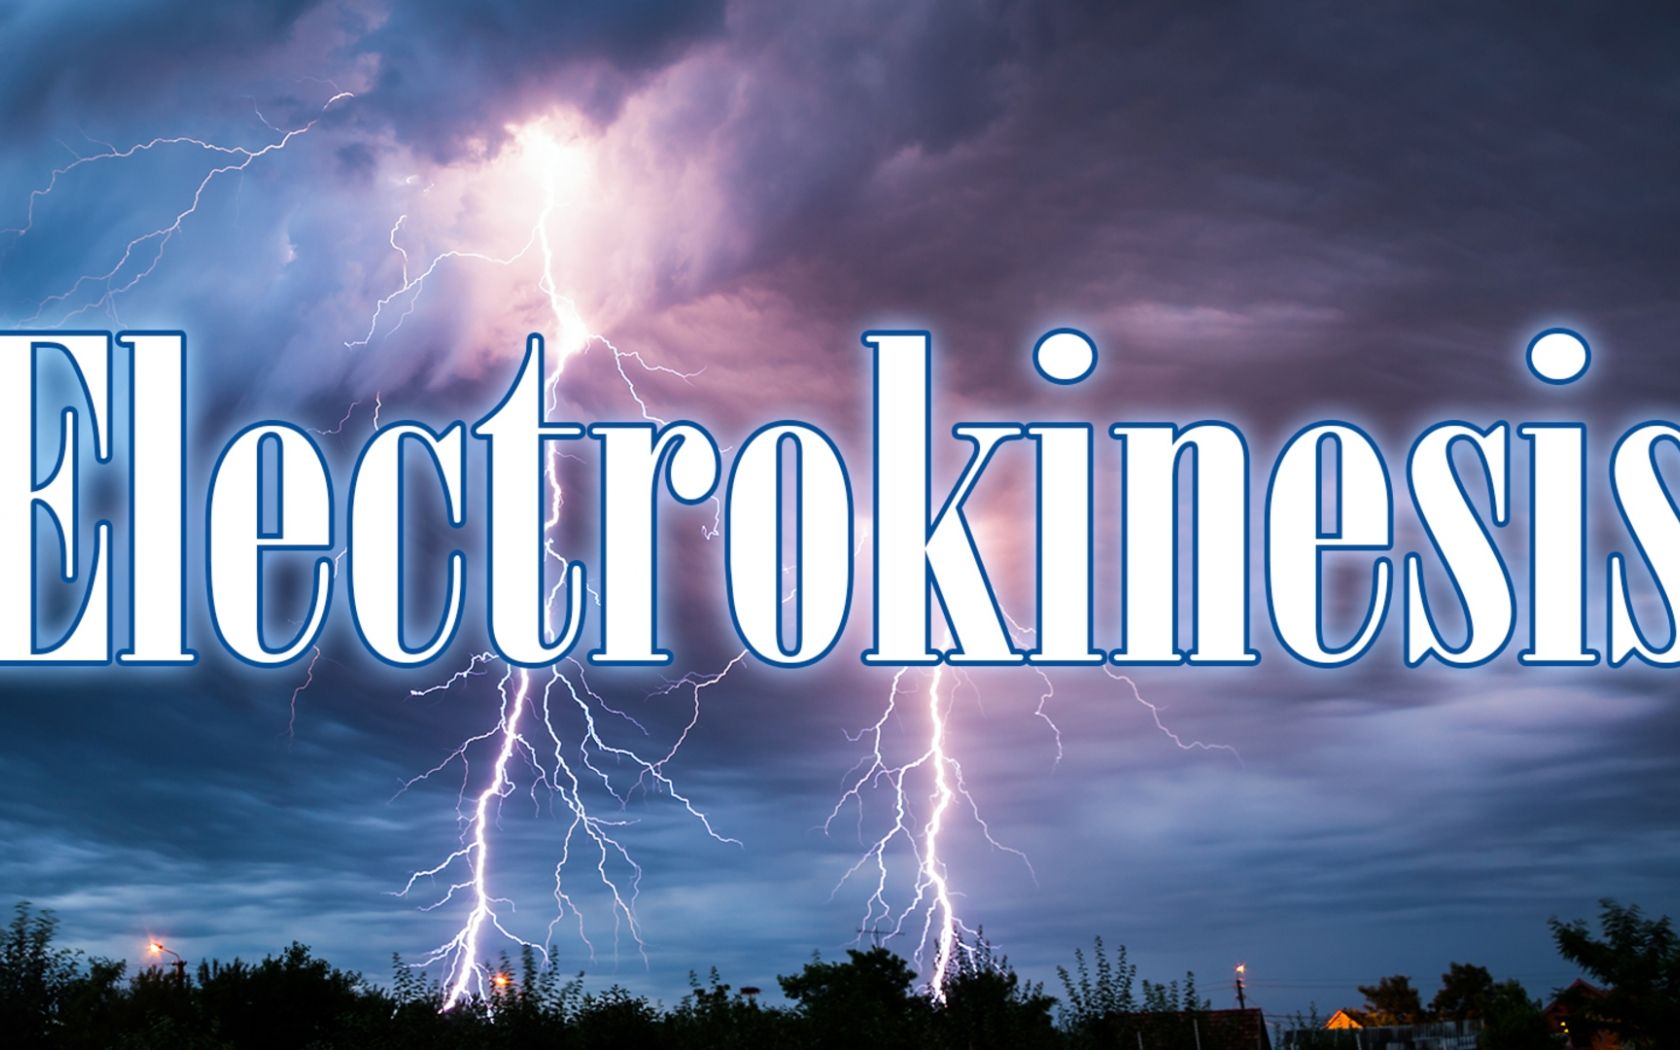 Free download Electrokinesis The Beginning of a Weapon